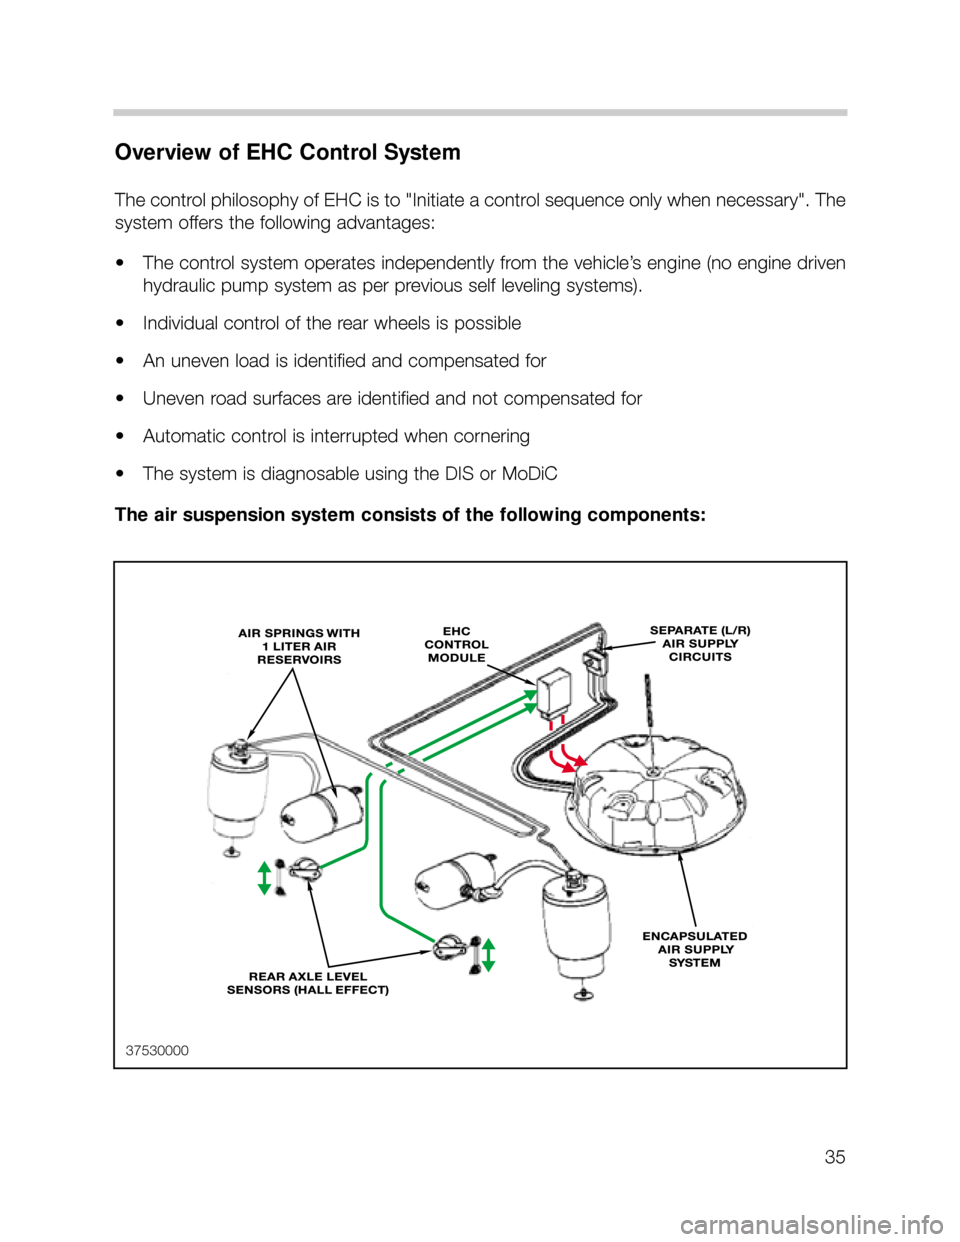 BMW X5 2003 E53 Workshop Manual 35
Overview of EHC Control System
The control philosophy of EHC is to "Initiate a control sequence only when necessary". The
system offers the following advantages:
• The control system operates ind